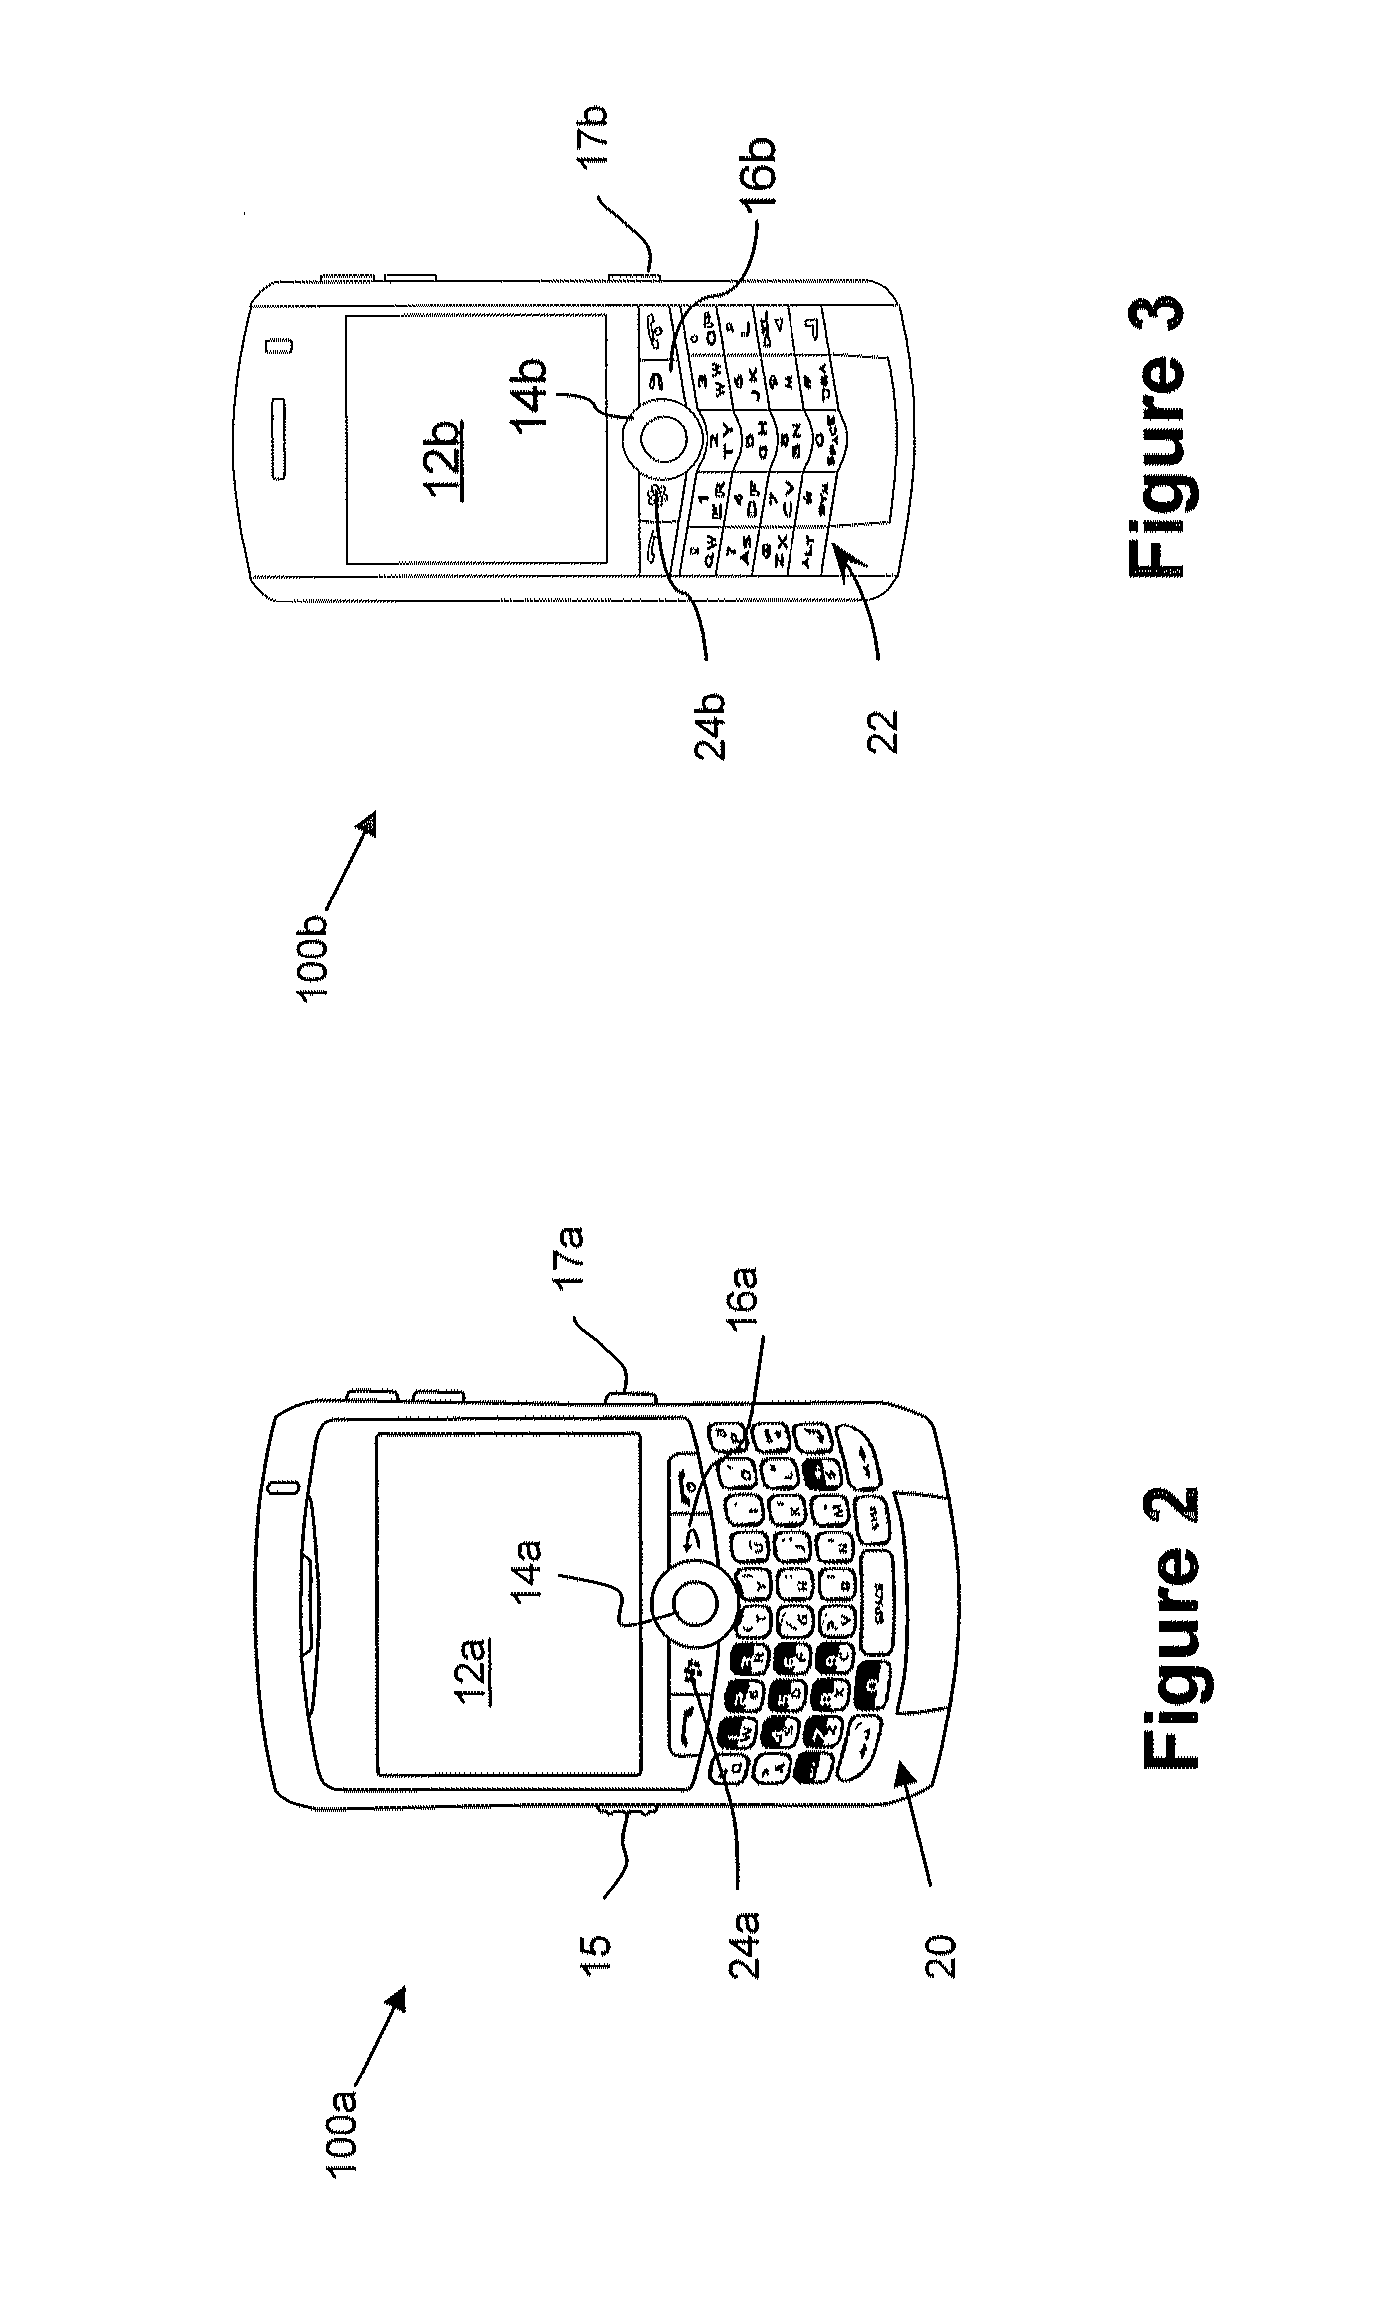 System and method for data transfer through animated barcodes